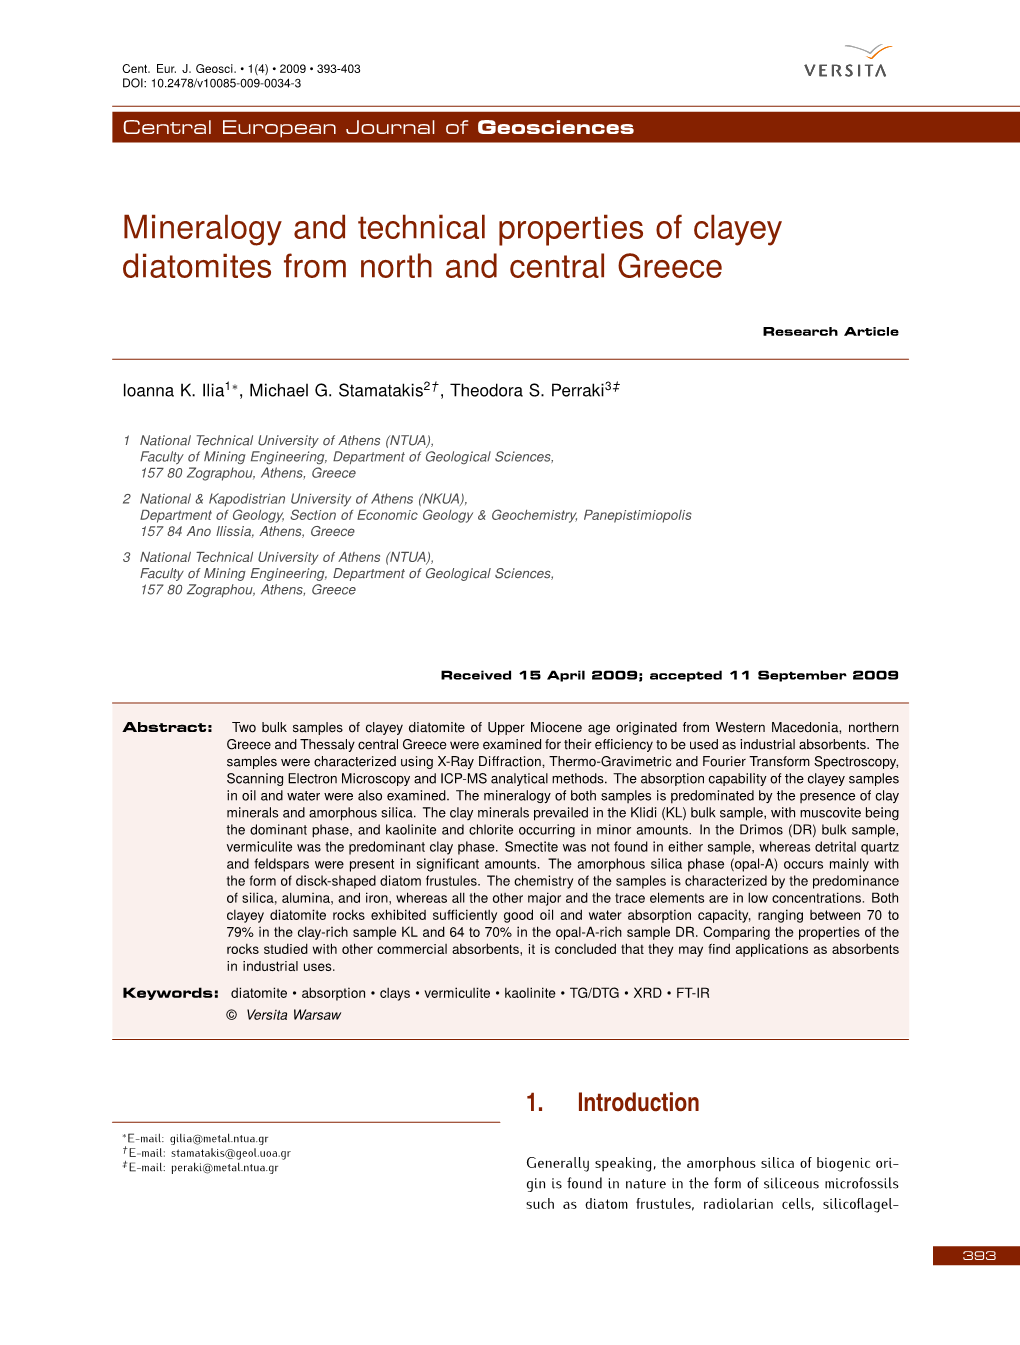 Mineralogy and Technical Properties of Clayey Diatomites from North and Central Greece